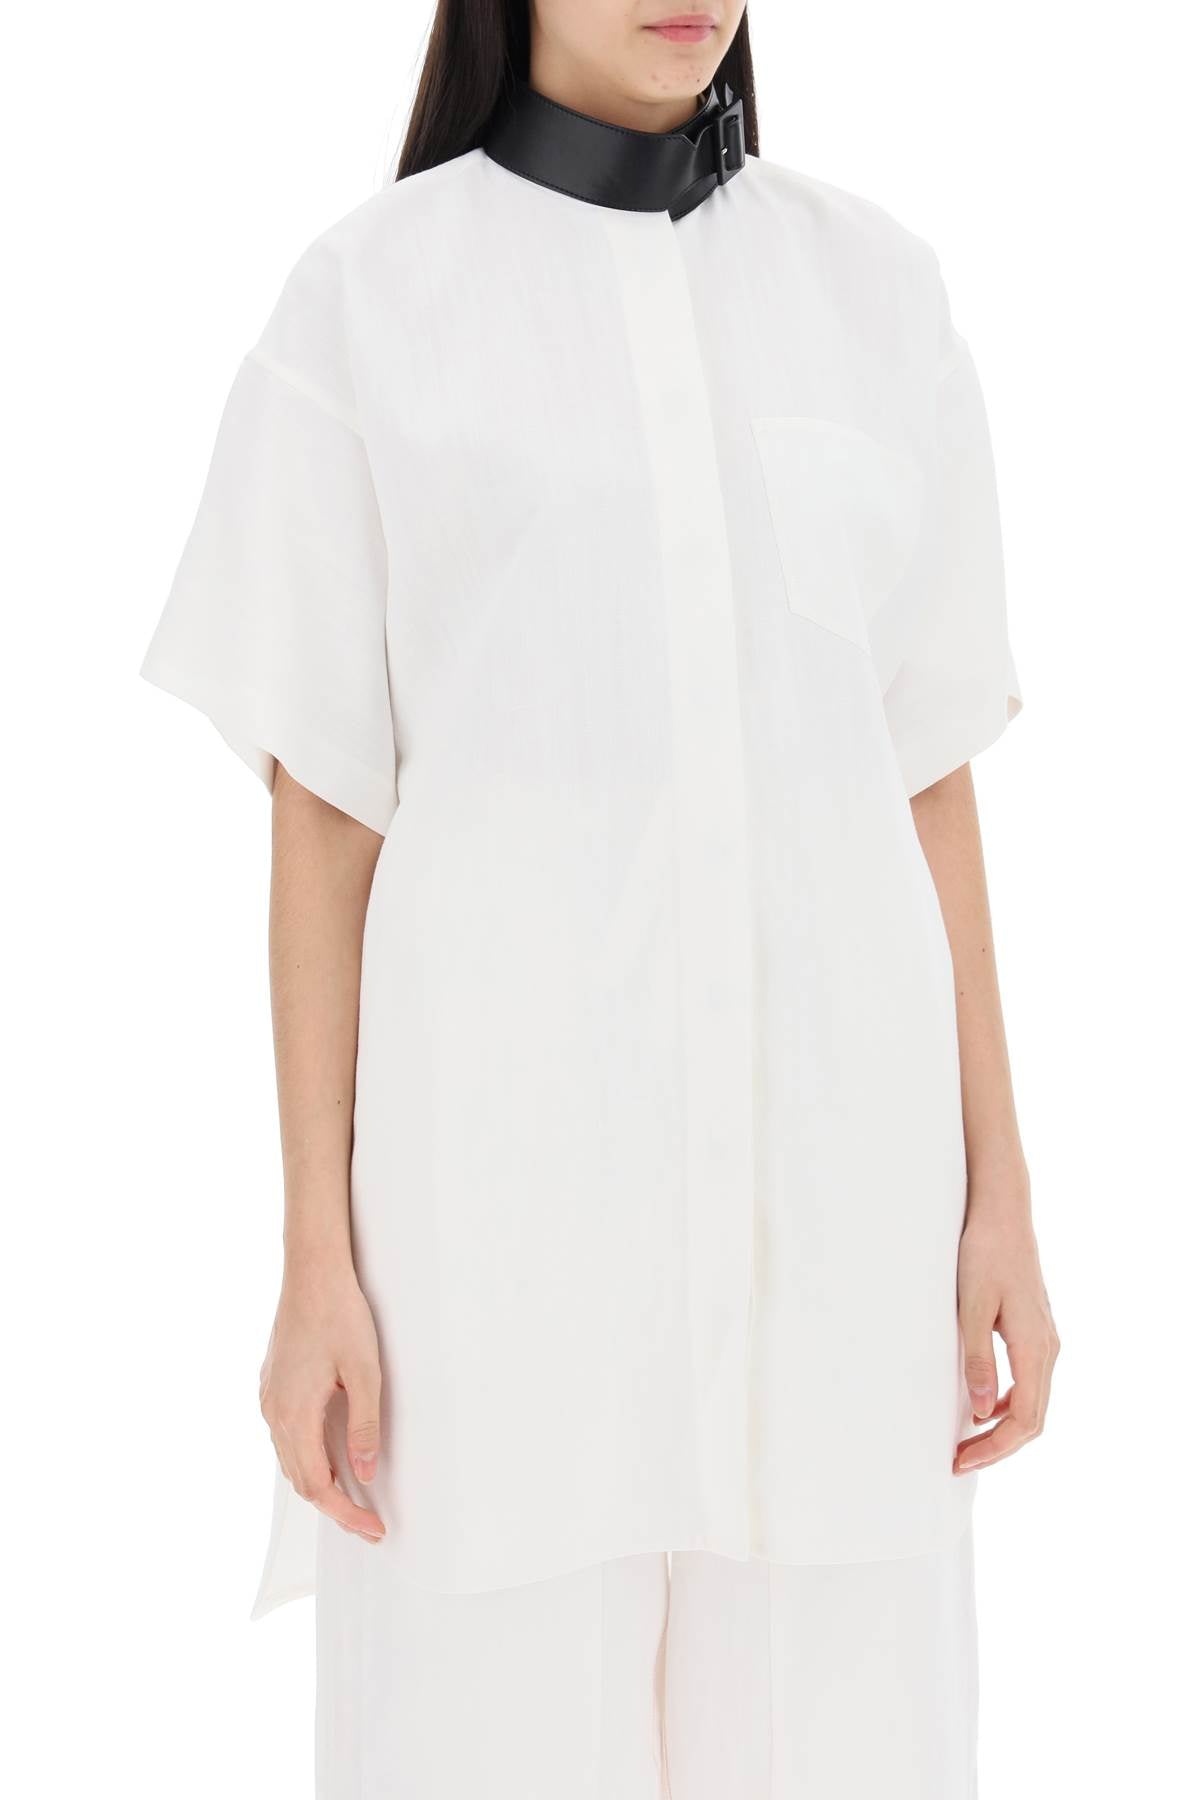 Shop Ferragamo White Midi Chemisier Dress With Faux Leather Strap And Buckle